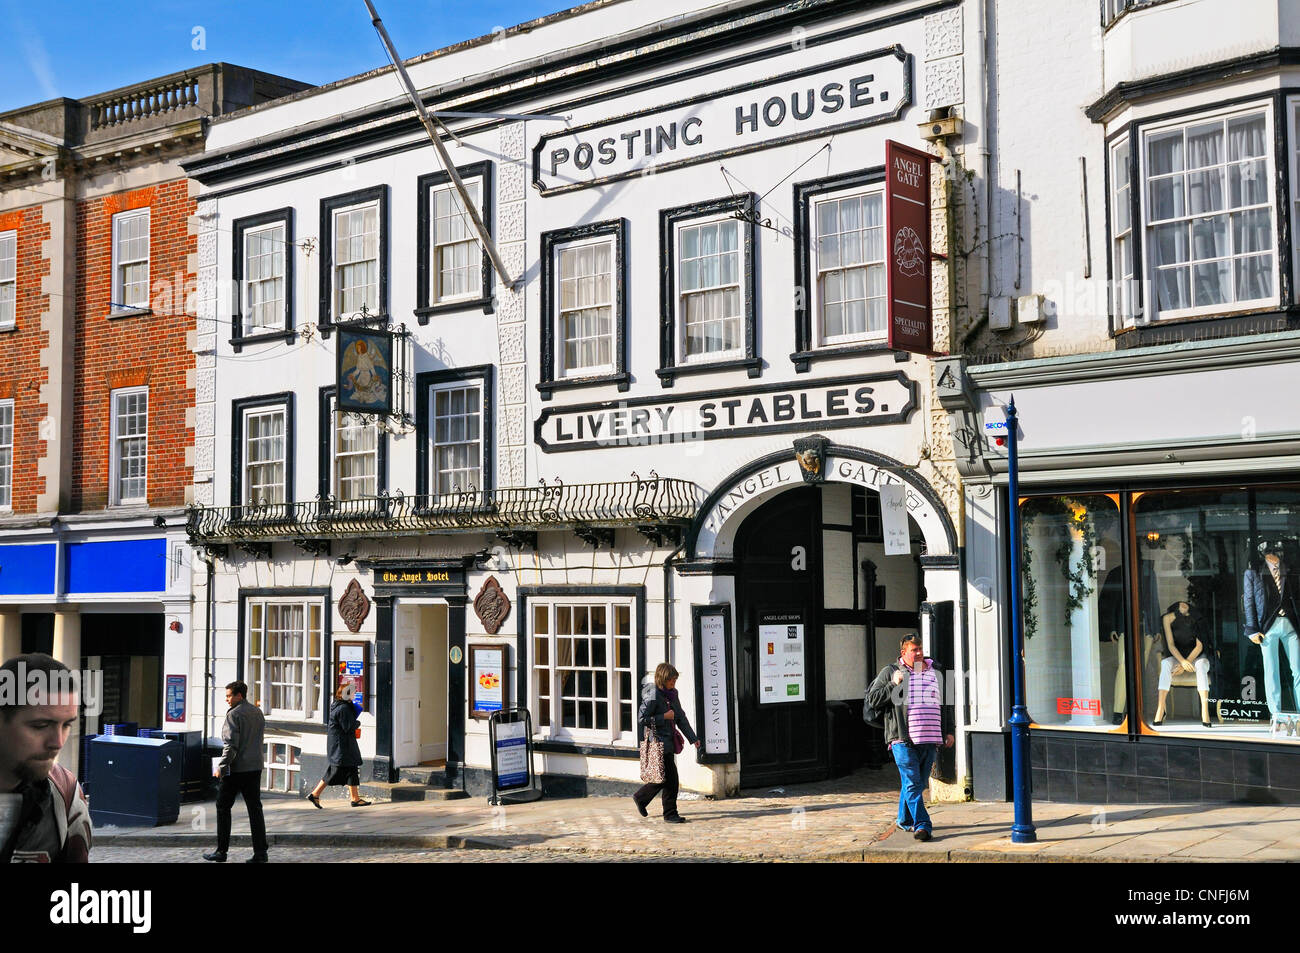 Surrey History Centre High Resolution Stock Photography and Images - Alamy